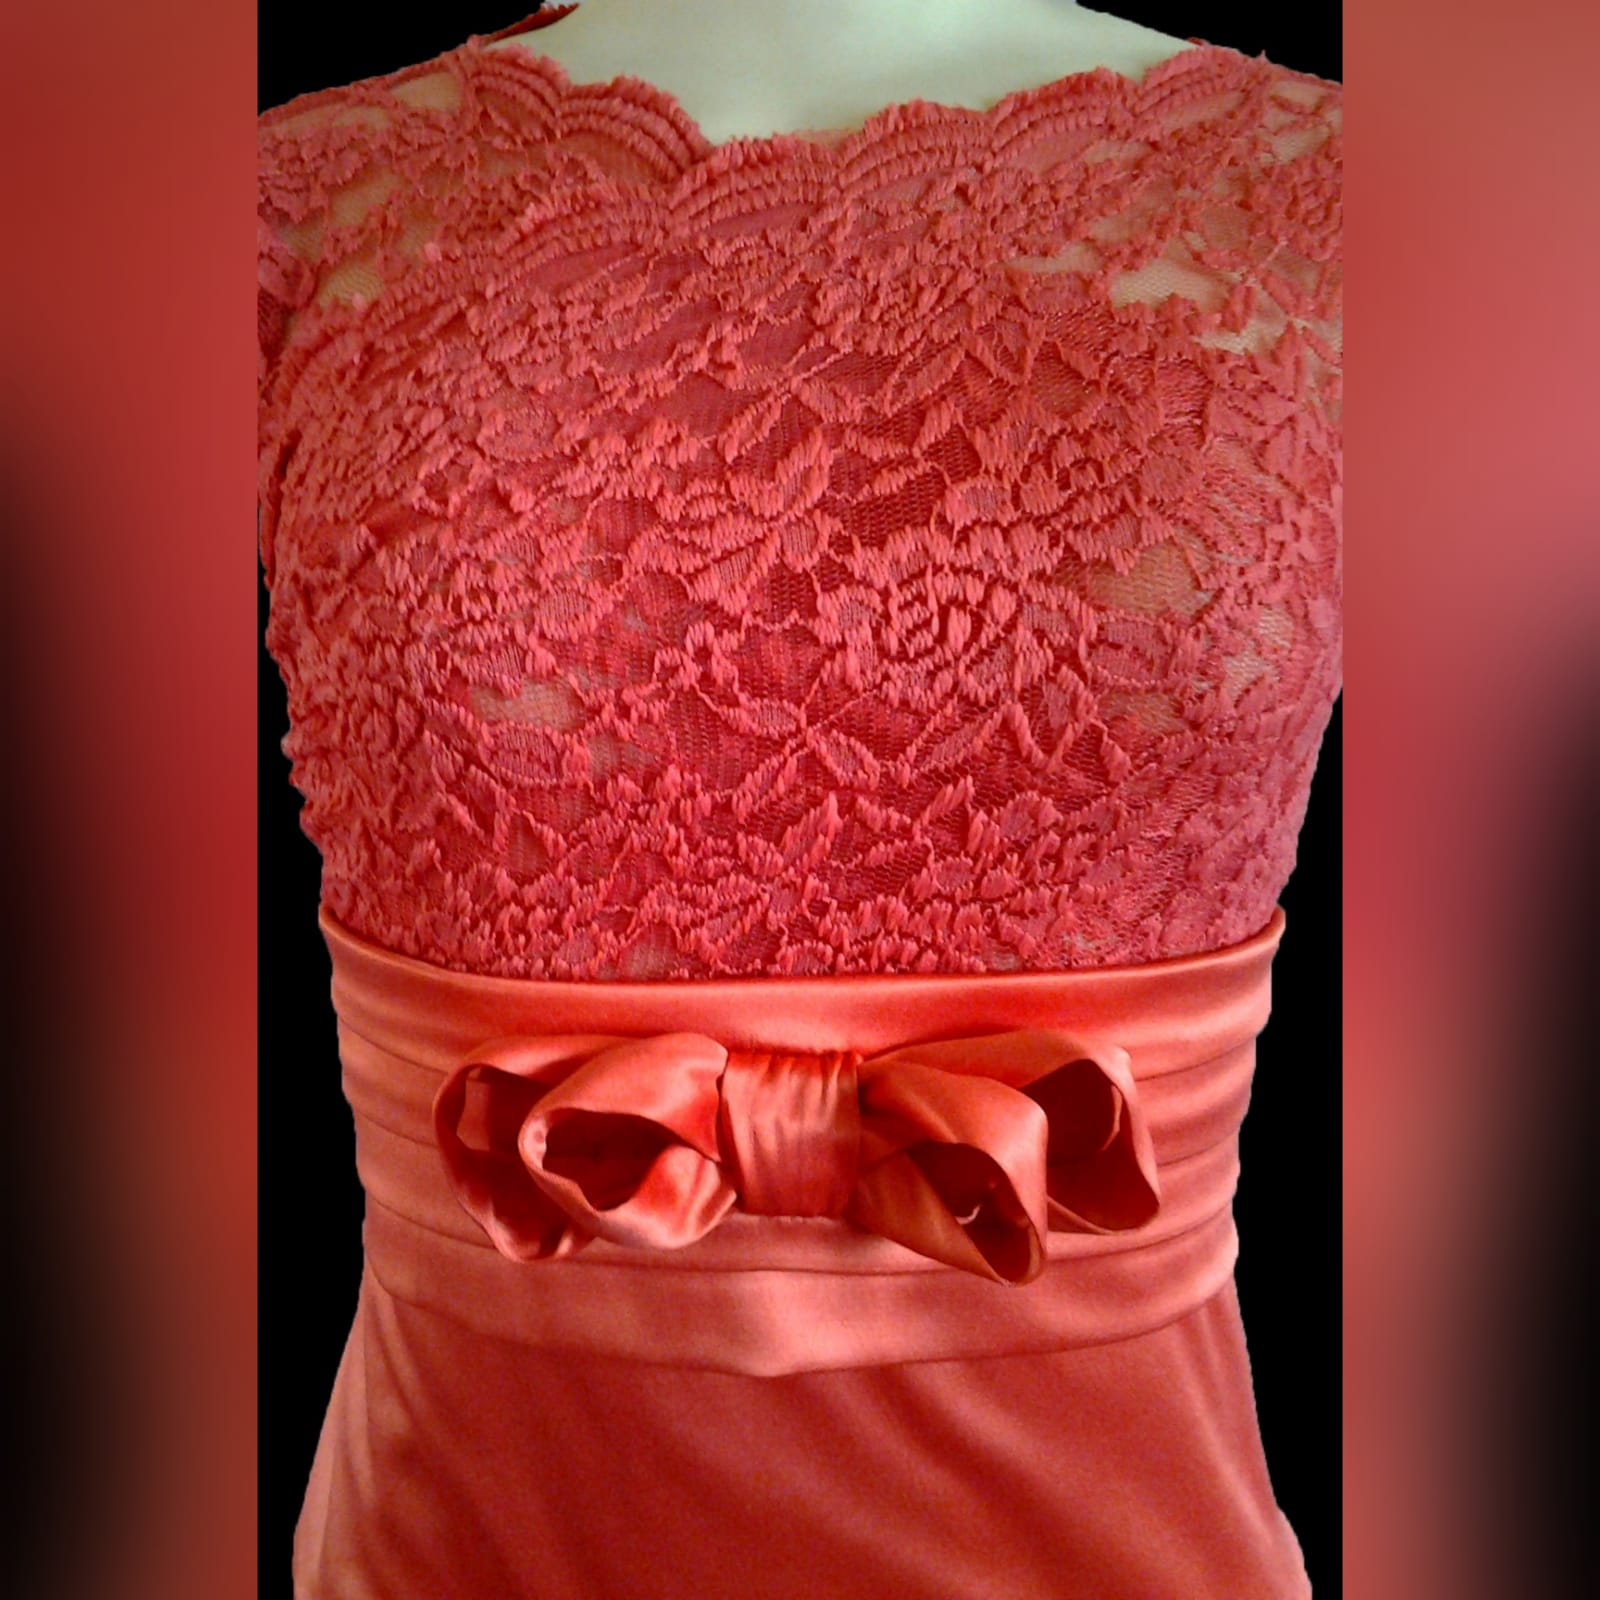 2 piece coral evening outfit 6 2 piece coral evening outfit for a stage performance. Lace top with short sleeves, with a high waisted pencil skirt with a pleated waistband with a bow detail.